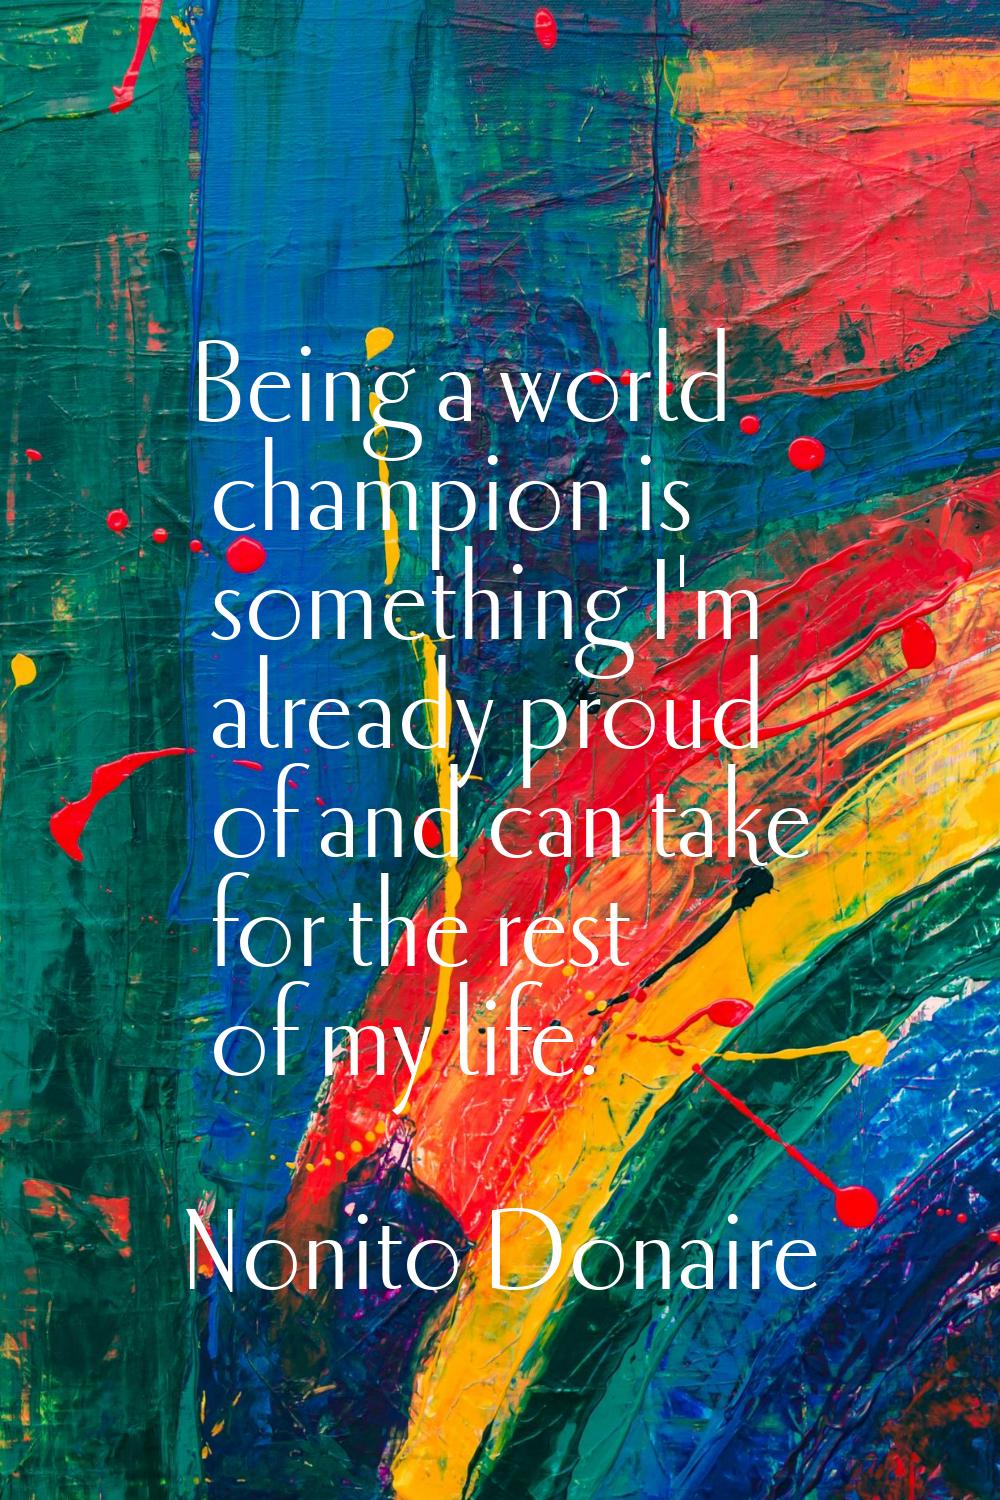 Being a world champion is something I'm already proud of and can take for the rest of my life.